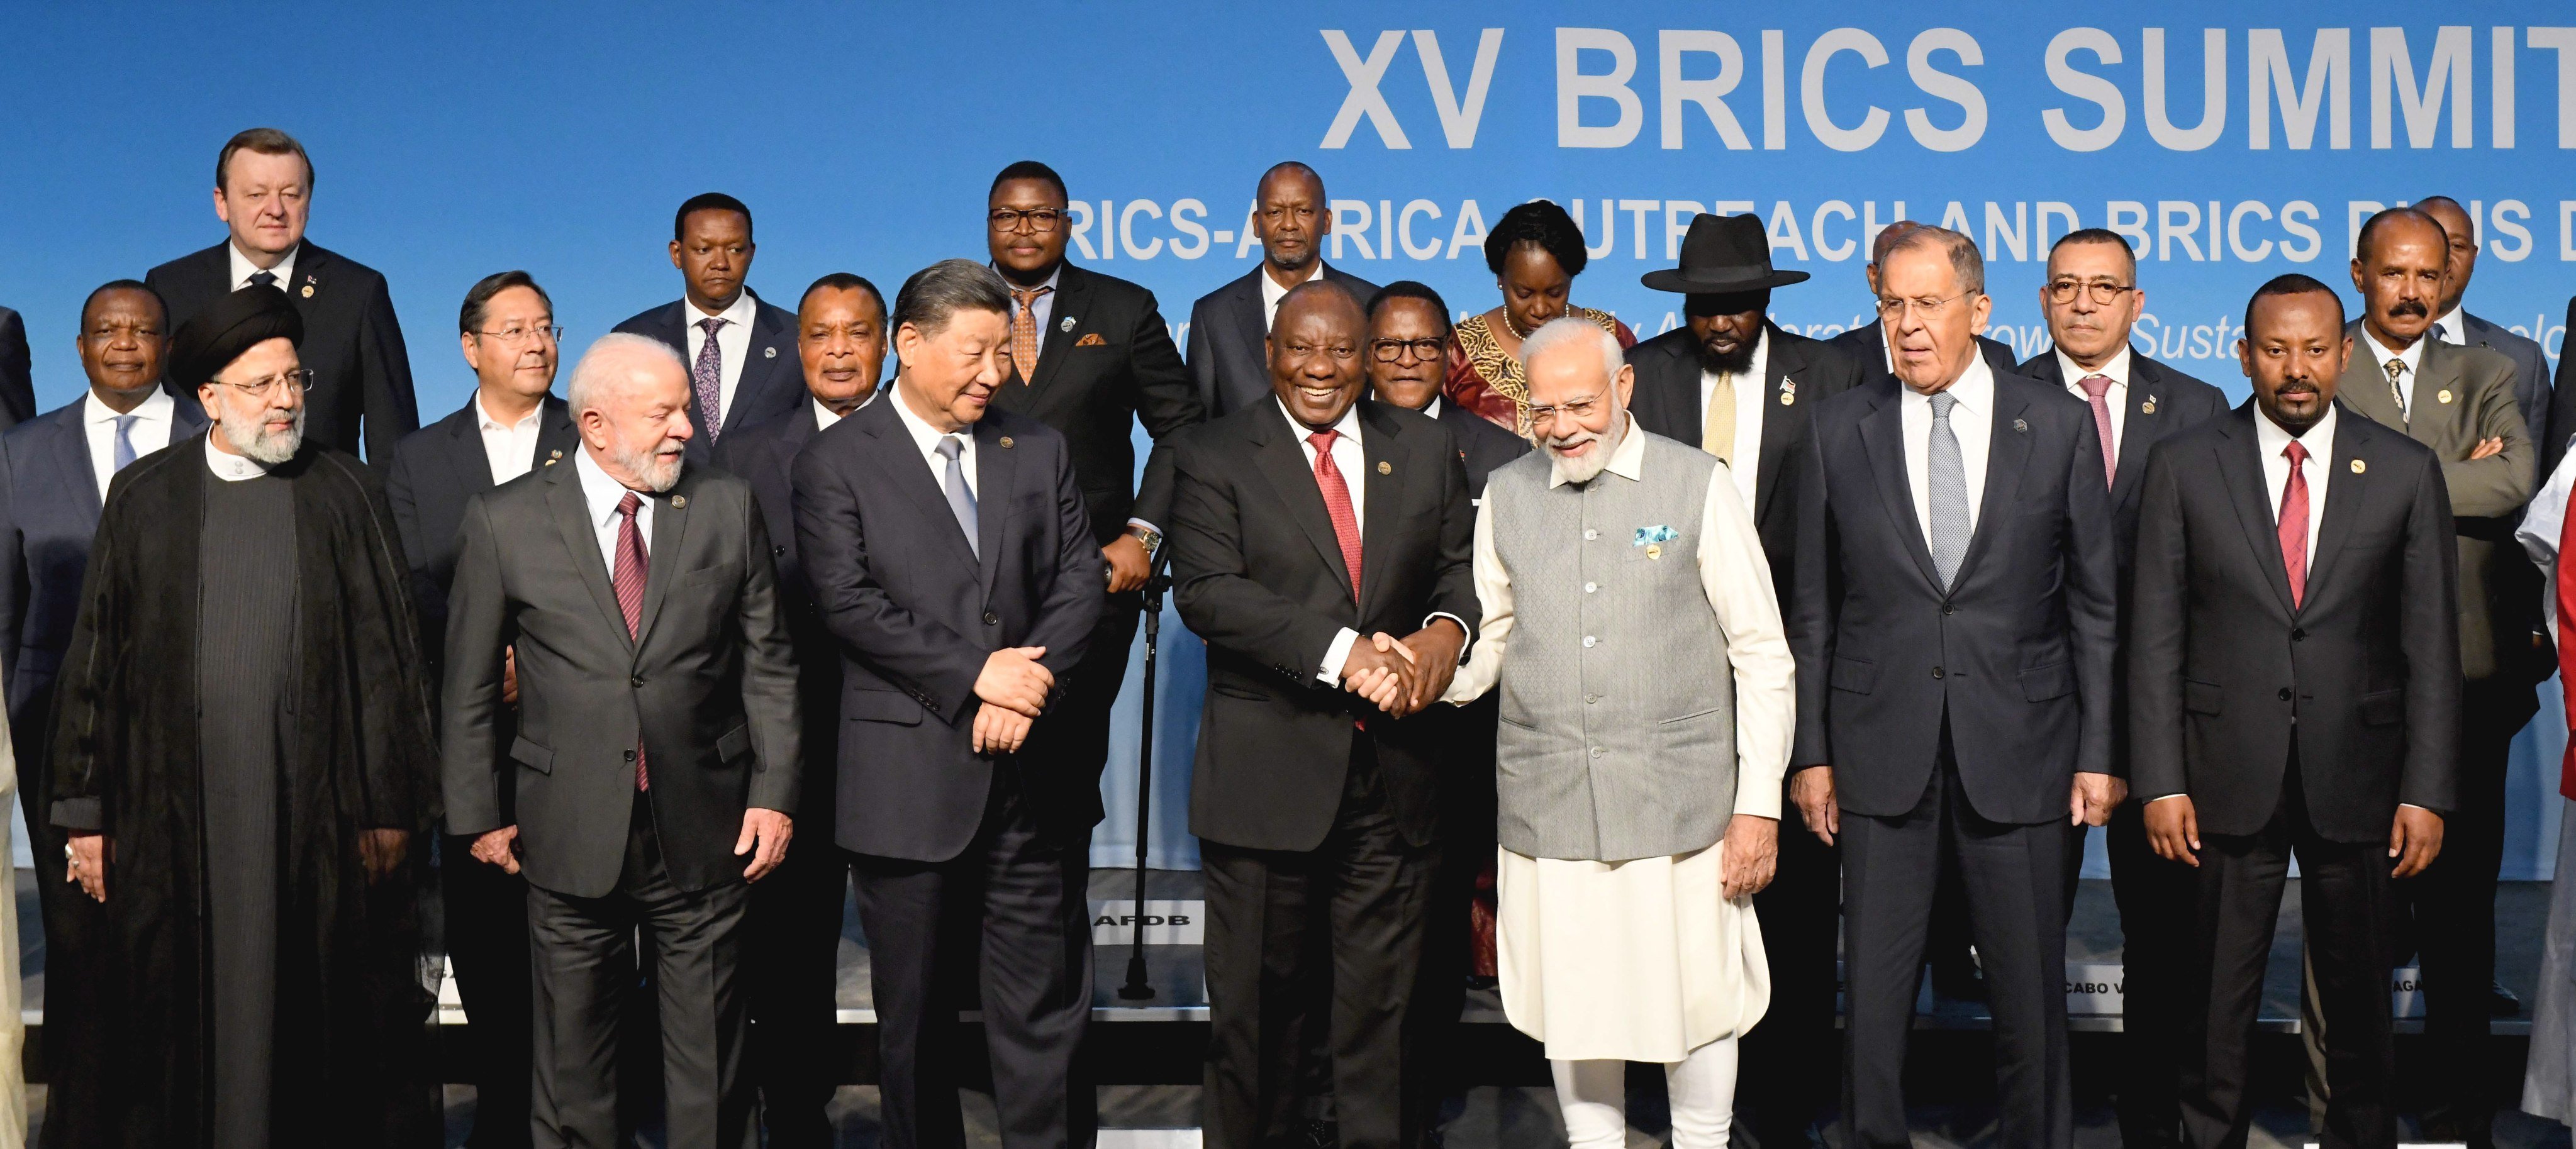  South African President Cyril Ramaphosa (centre) shakes hands with Indian Prime Minister Narendra Modi while (from left) Iranian President Ebrahim Raisi, Brazilian President Luiz Inácio Lula da Silva and Chinese President Xi Jinping look on as they pose for photo with delegates on the closing day of the Brics Summit in Johannesburg, South Africa, on August 24. Photo: EPA-EFE